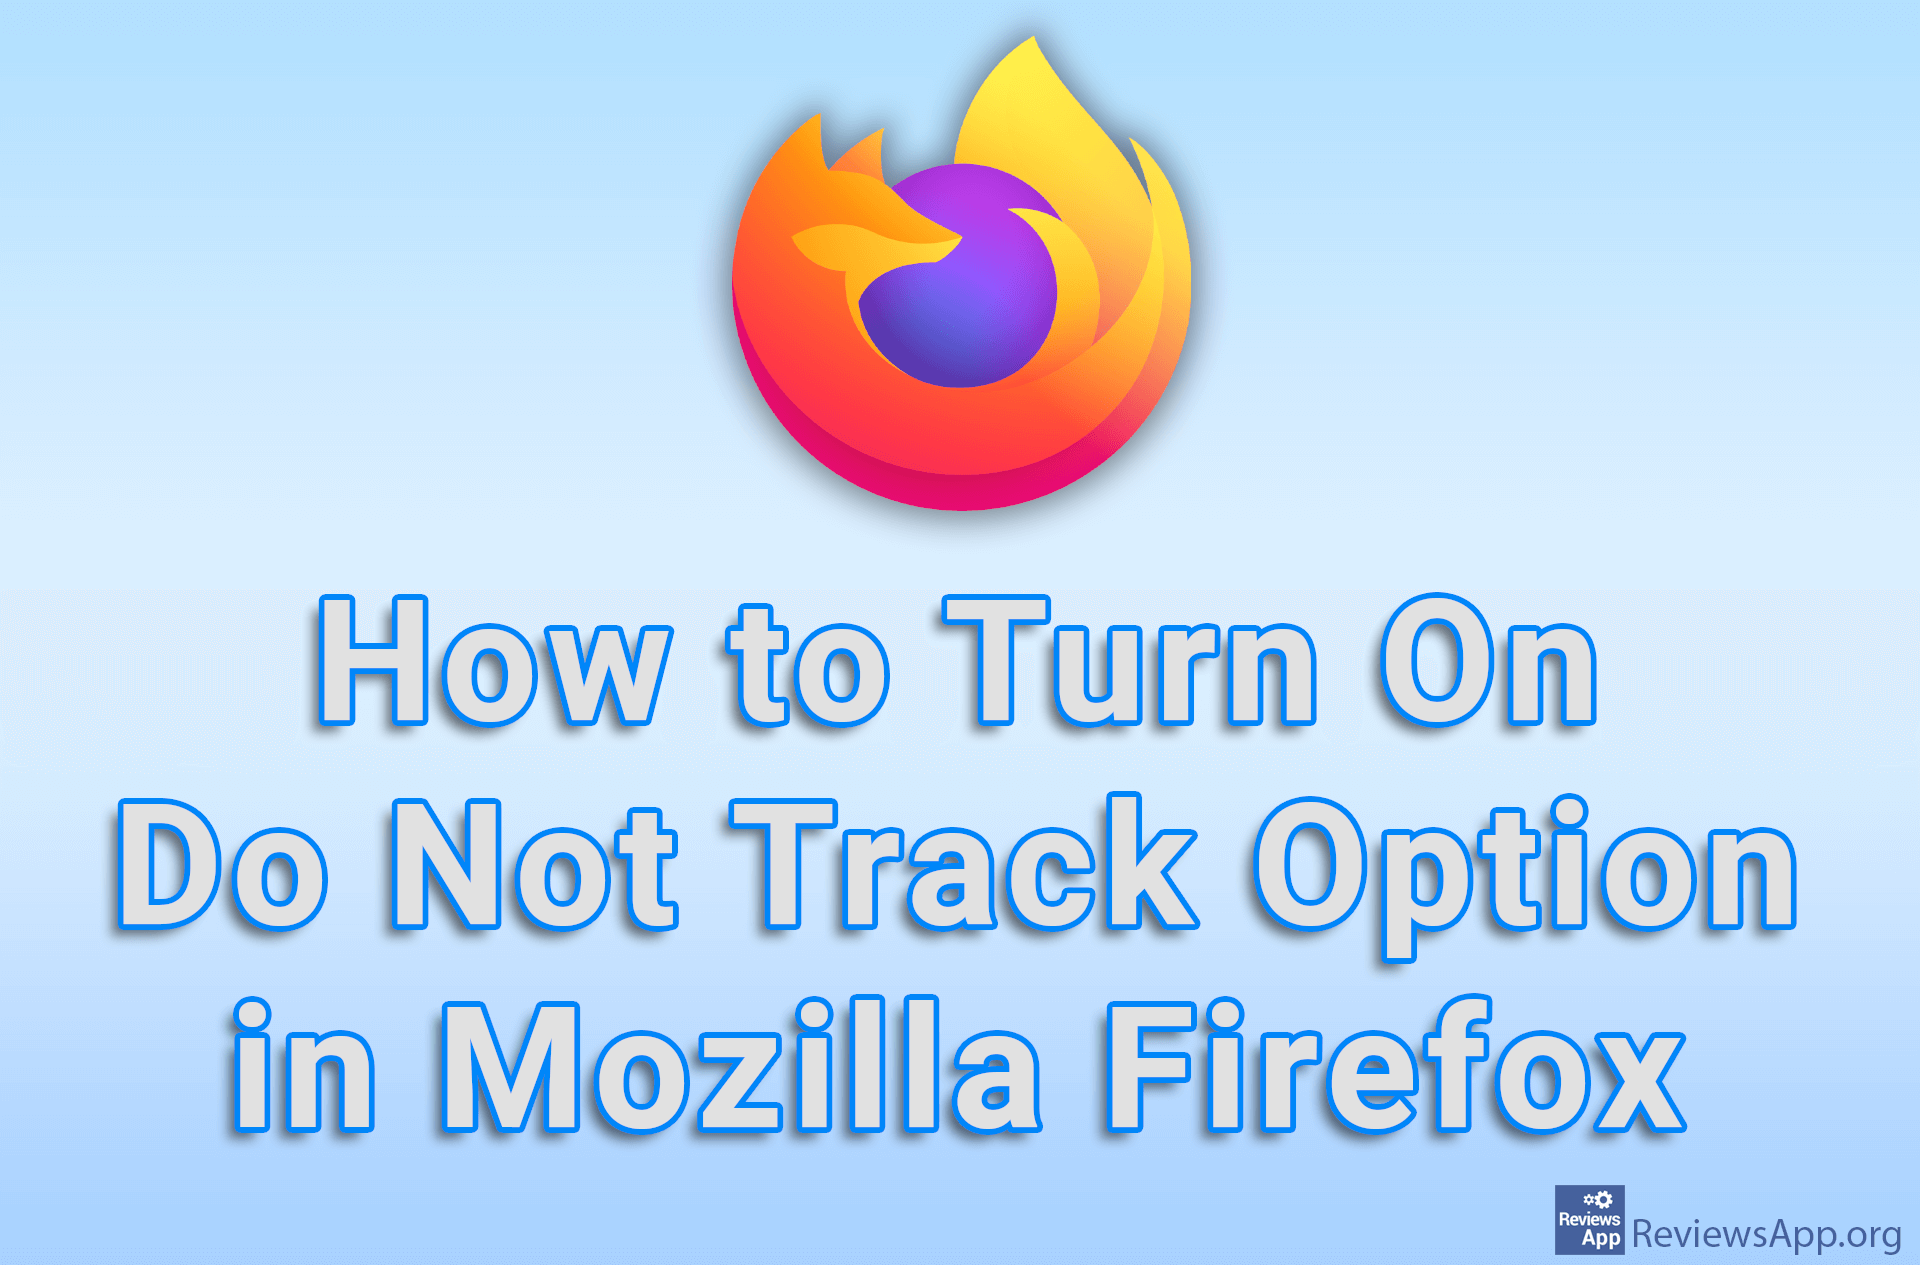 How to Turn On Do Not Track Option in Mozilla Firefox